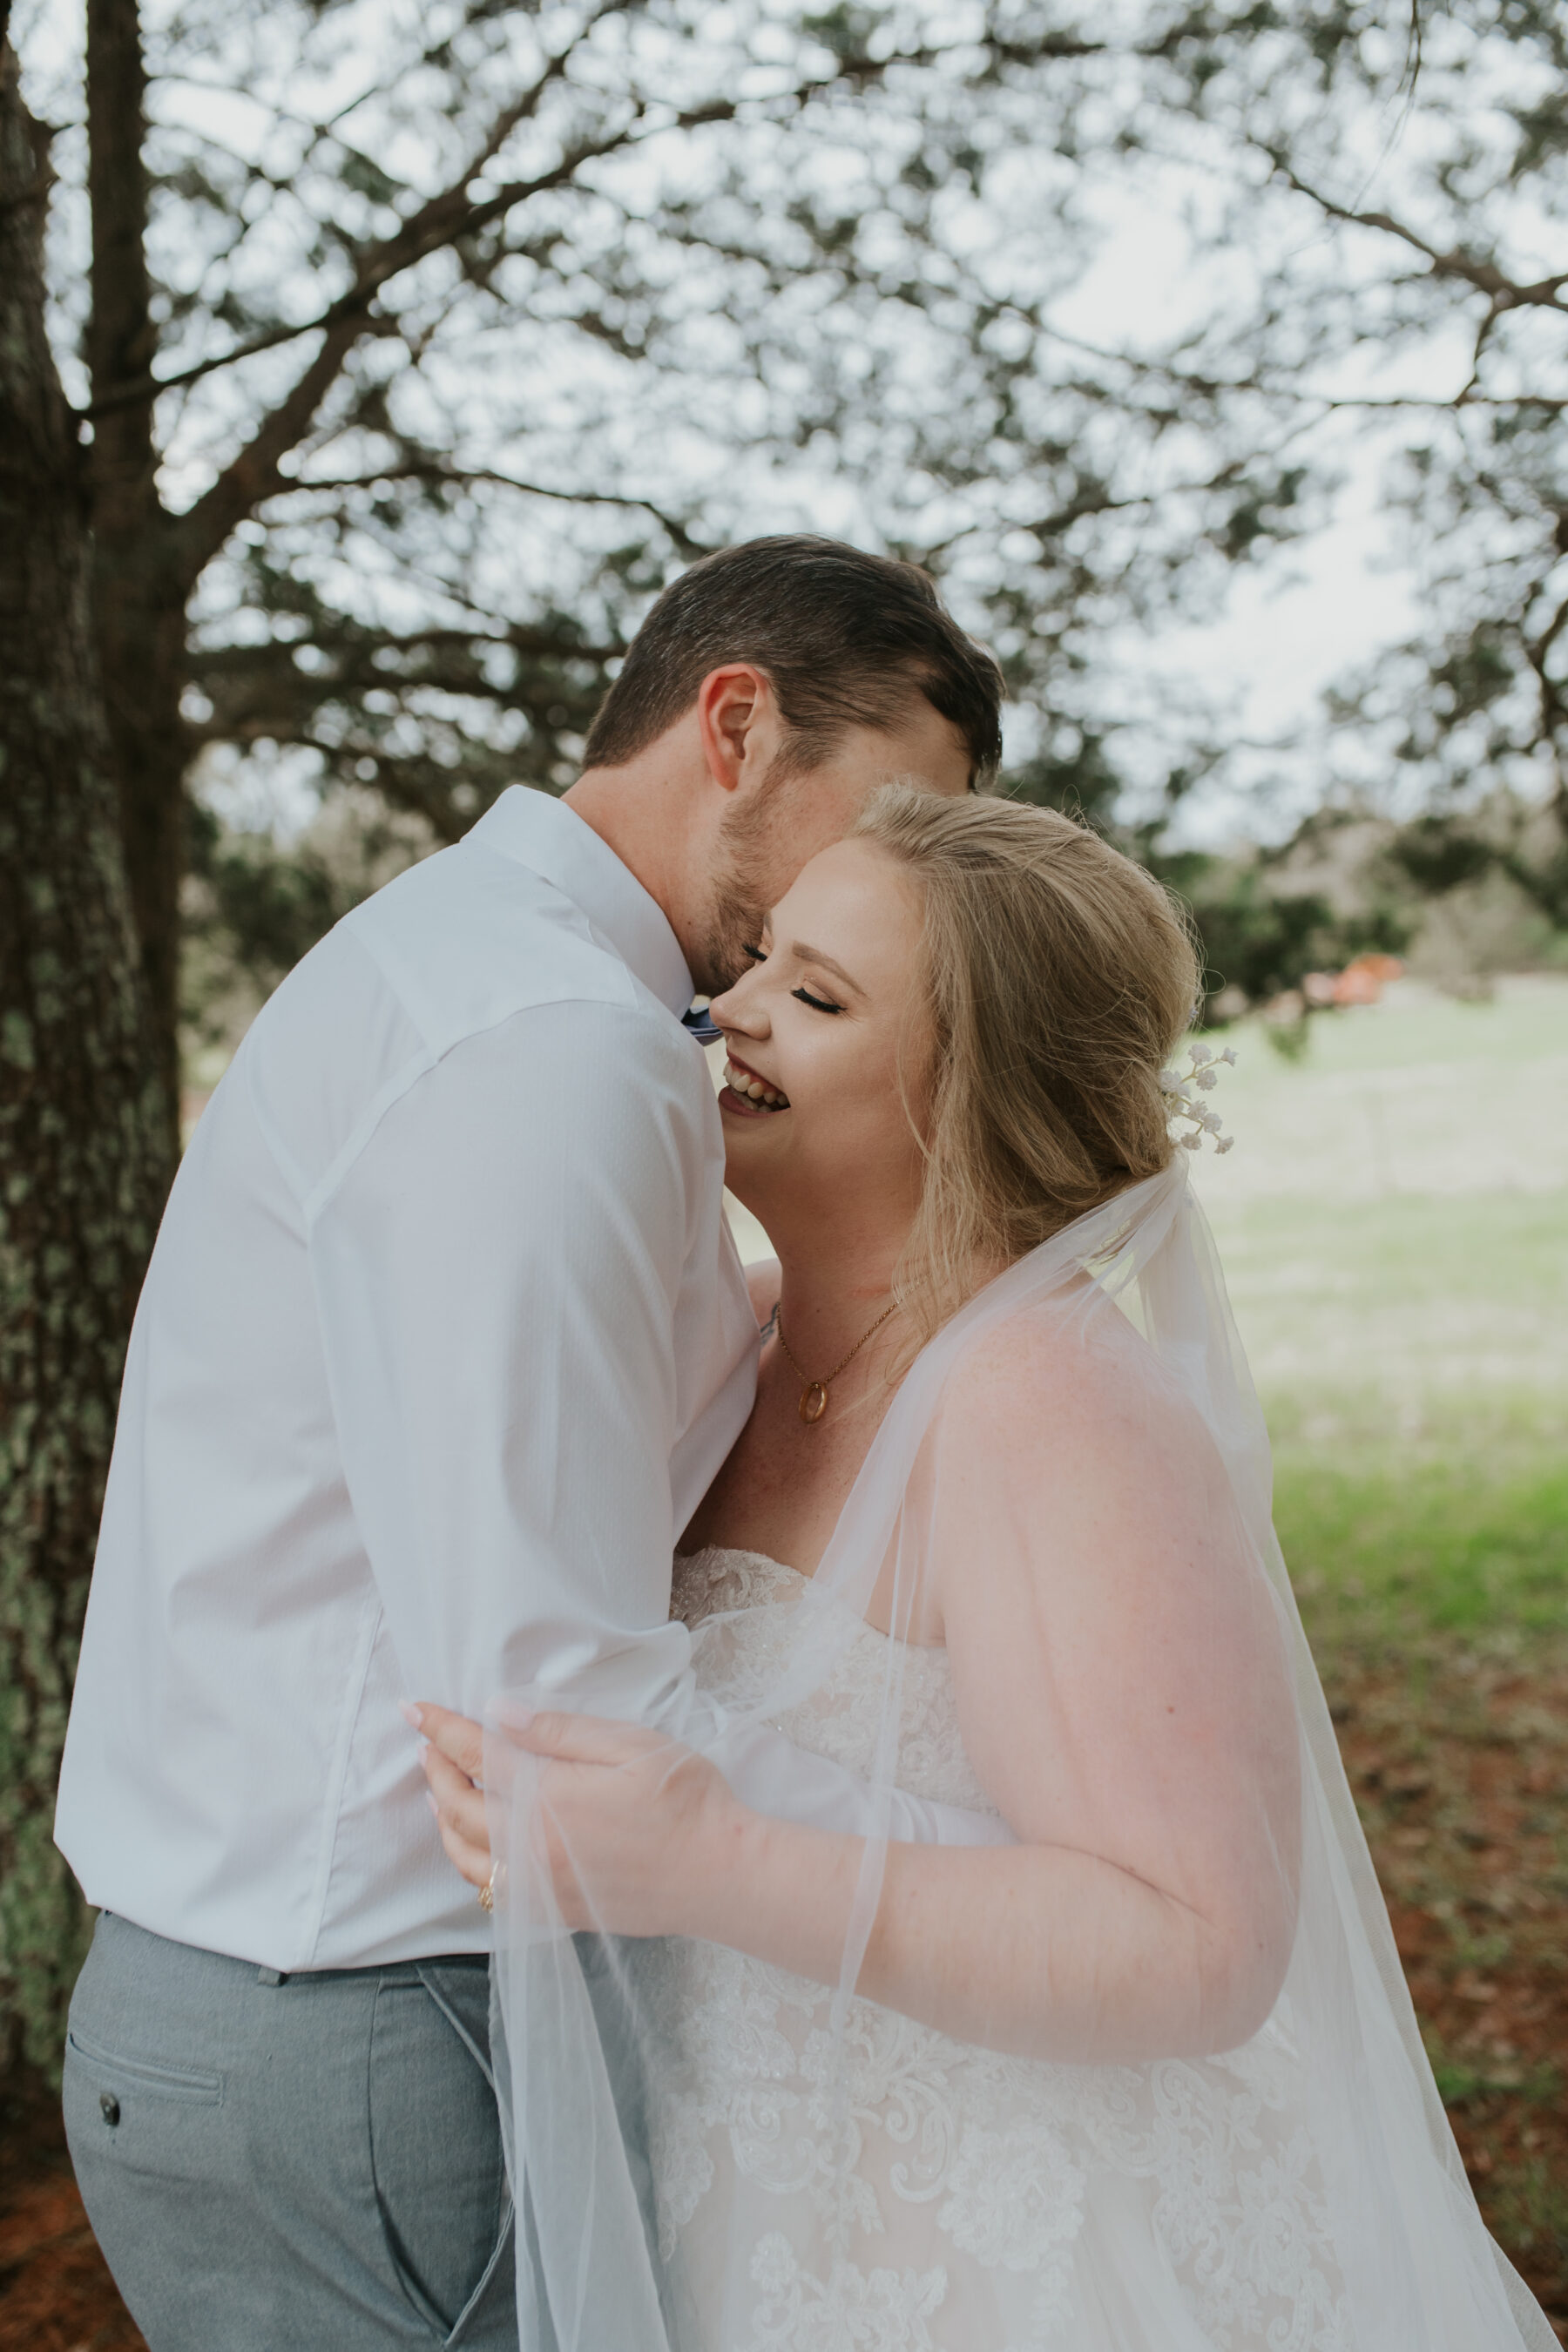 Intimate Backyard Wedding from Risen Vintage featured on Nashville Bride Guide